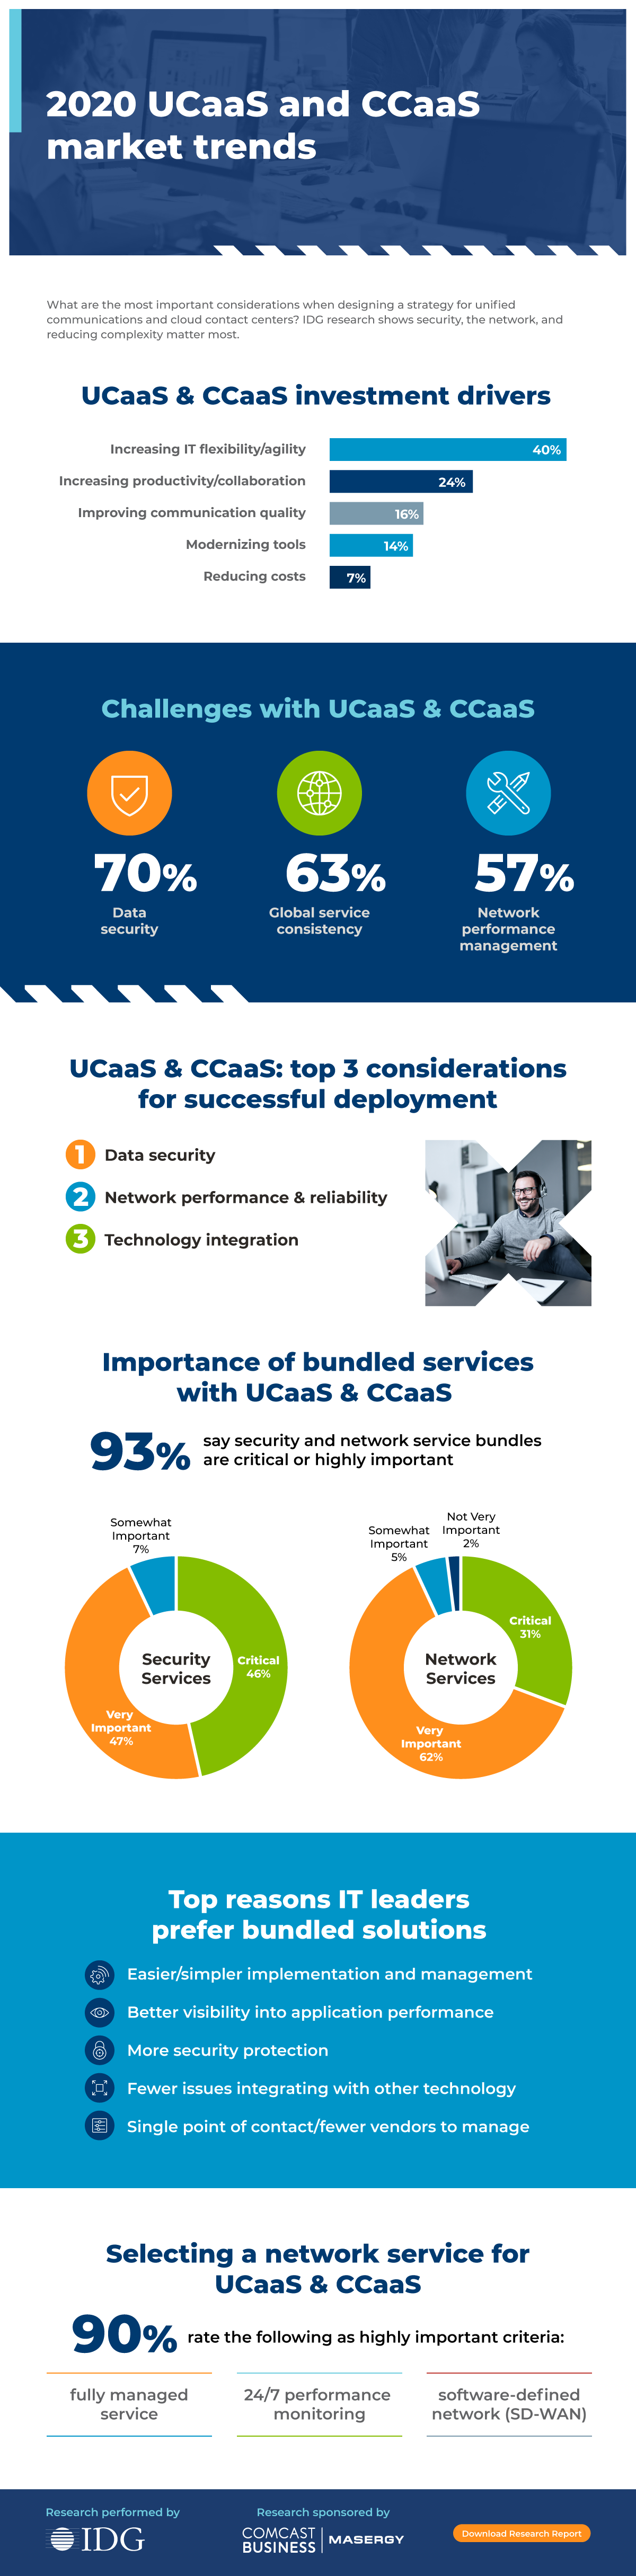 2020 UCaaS and CCaaS Market Trends Infographic